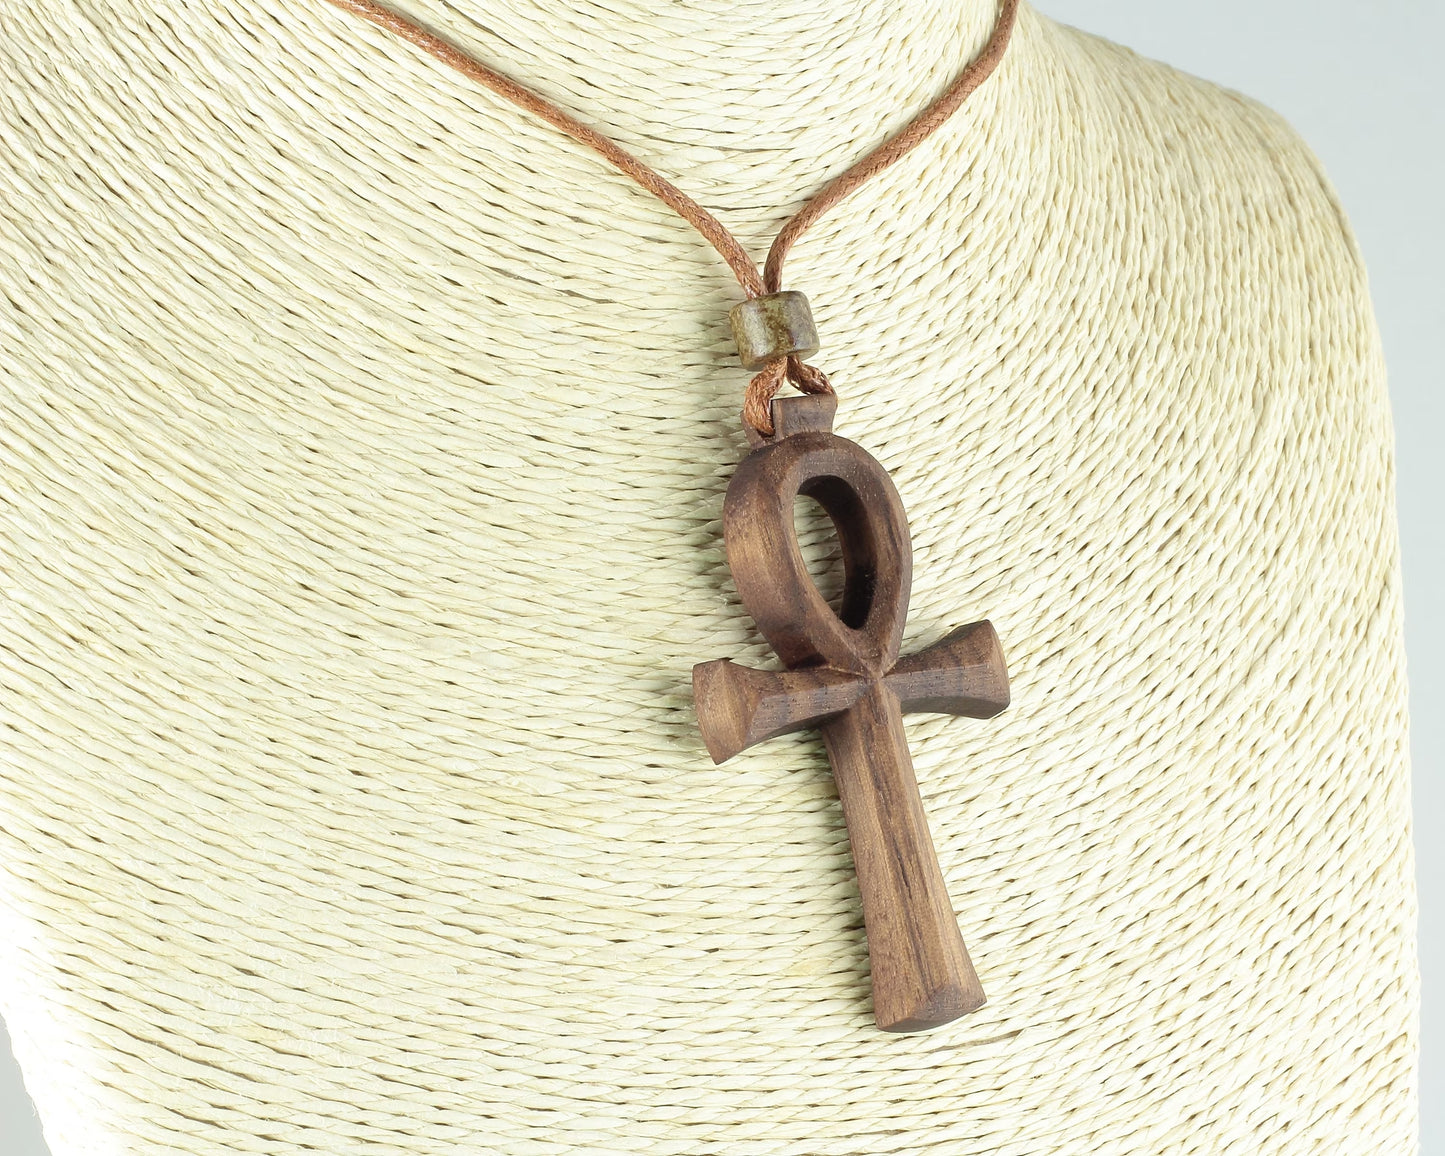 Handcrafted Wooden Ankh Necklace - Egyptian Cross Pendant